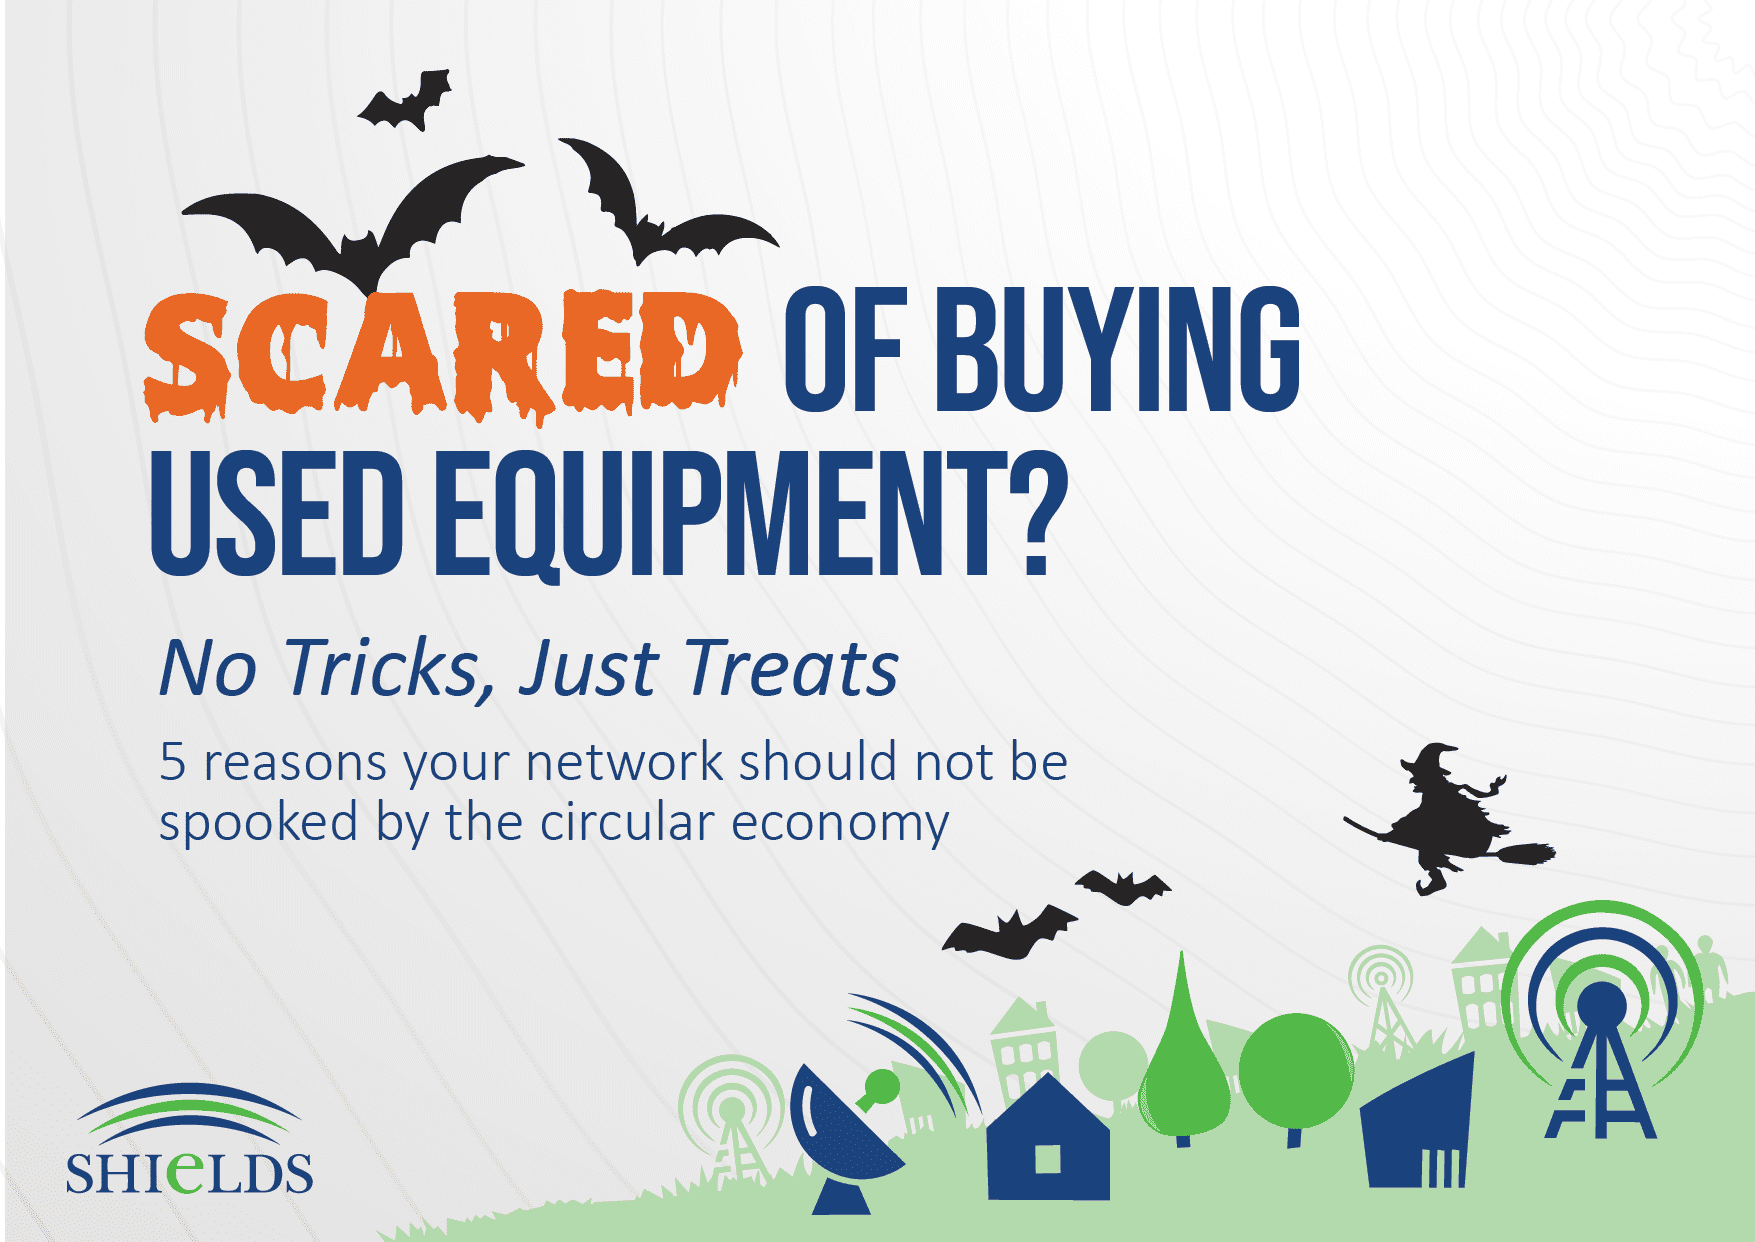 Sacred of buying used equipment? No tricks just treats. 5 reasons your network should not be spooked by the circular economy